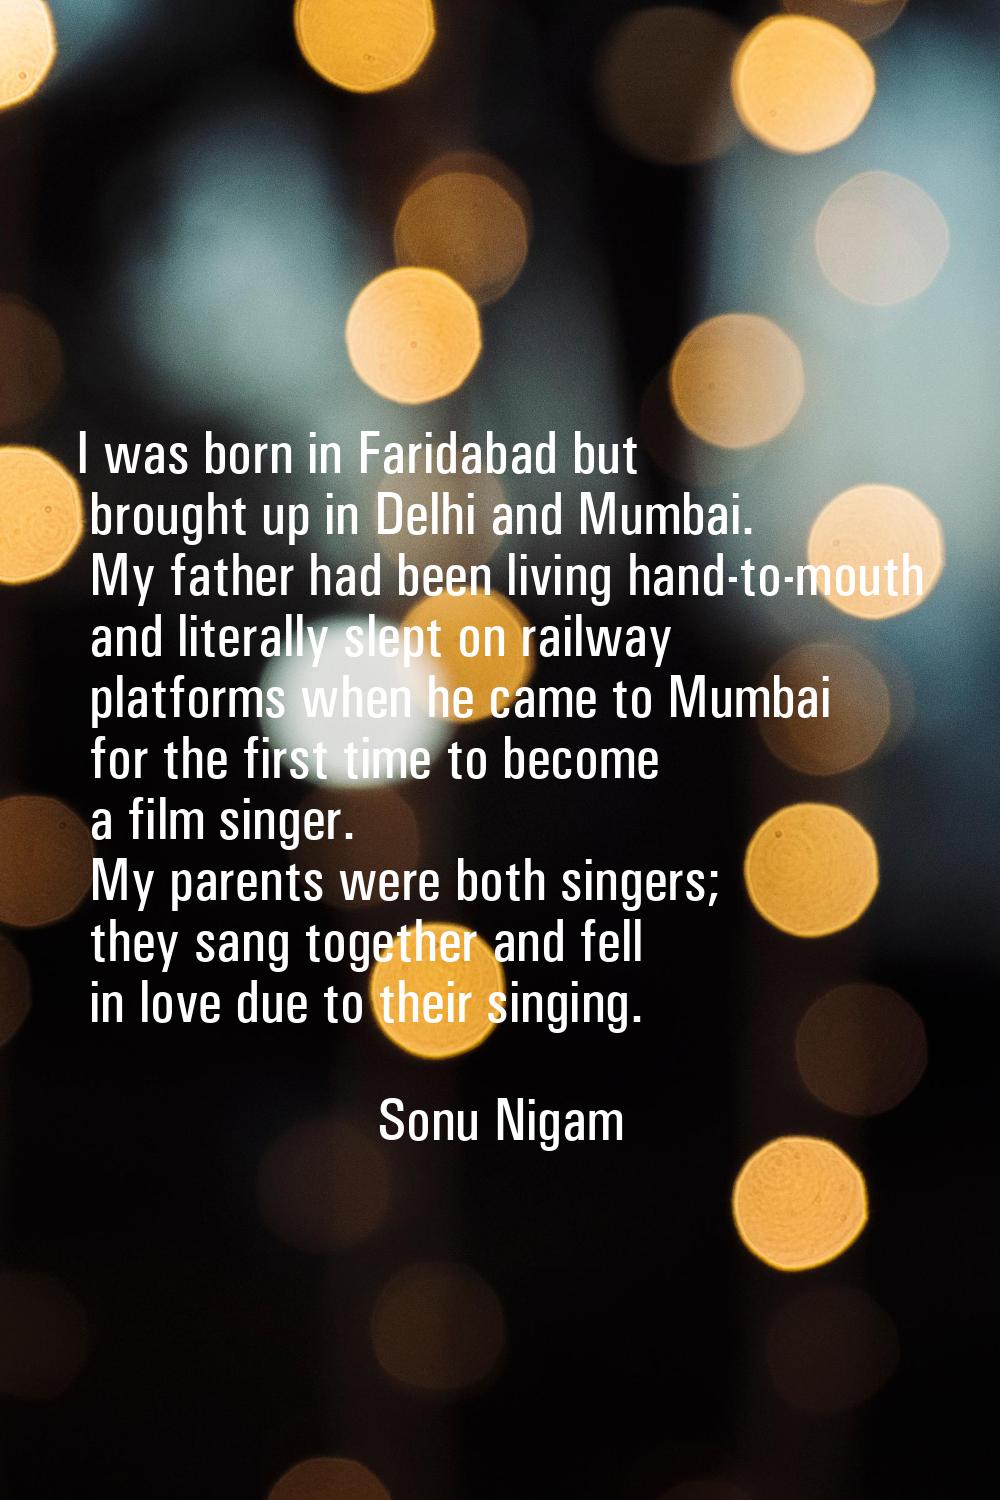 I was born in Faridabad but brought up in Delhi and Mumbai. My father had been living hand-to-mouth